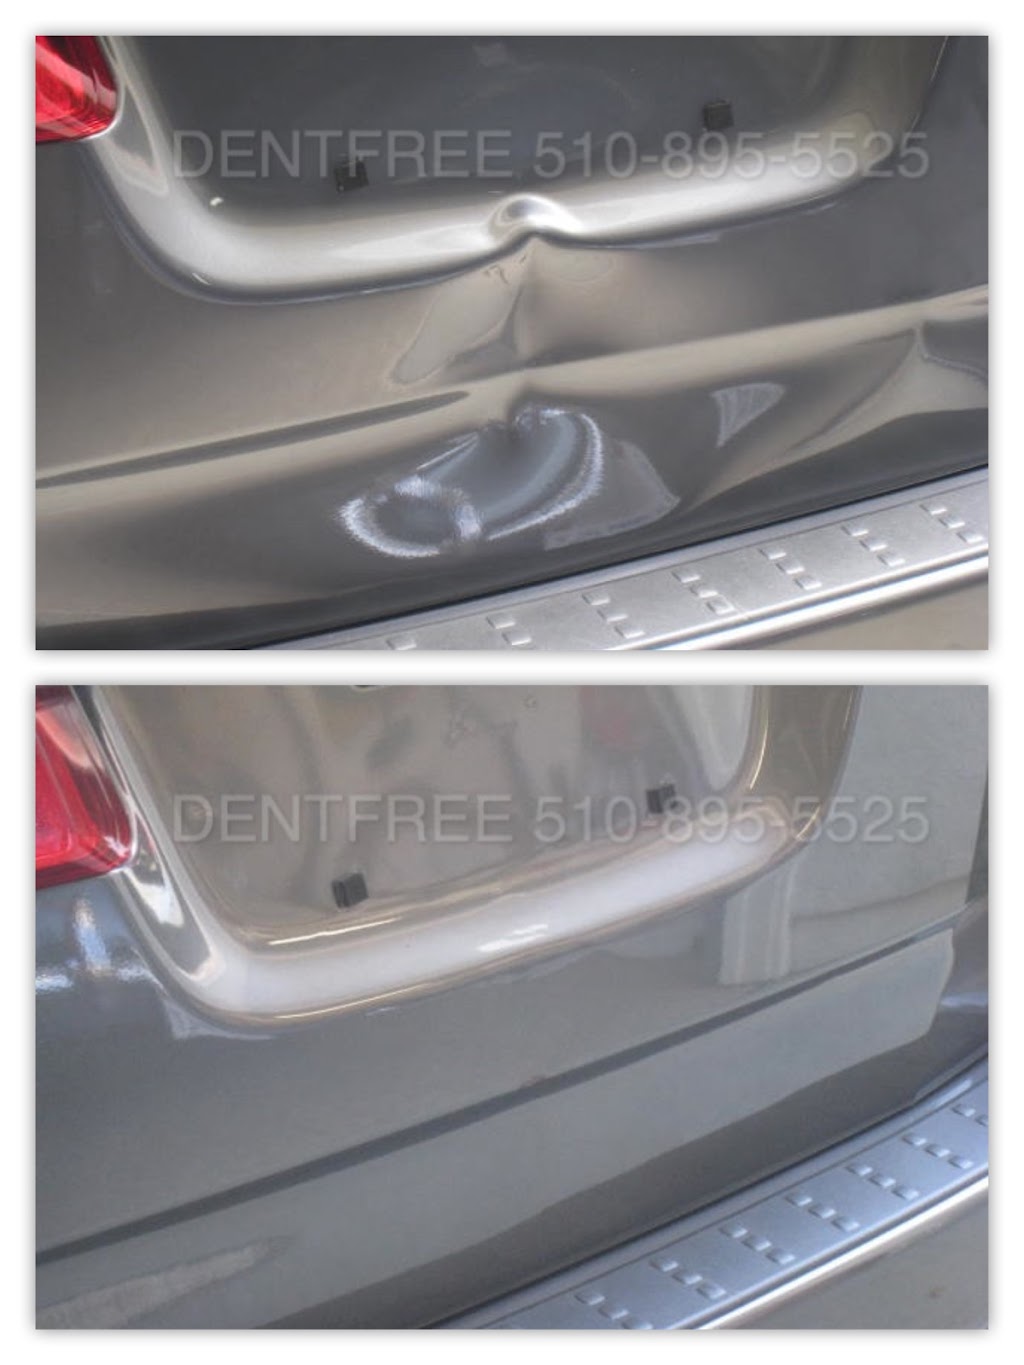 DentFree Paintless Dent Removal | San Leandro, CA 94579 | Phone: (510) 895-5525